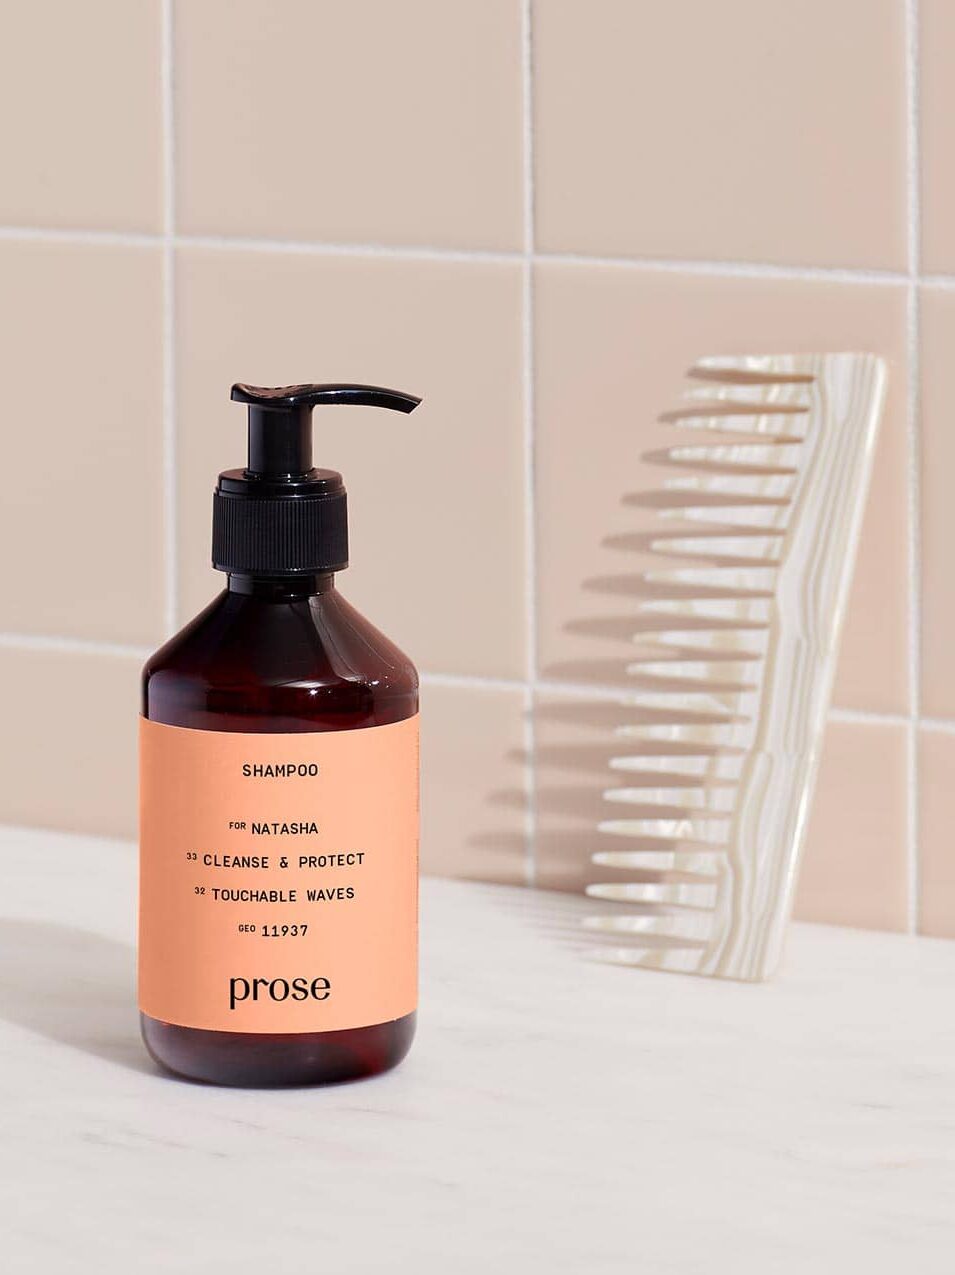 The shampoo product sits on a bathroom counter next to a comb propped against a pink tiled wall.